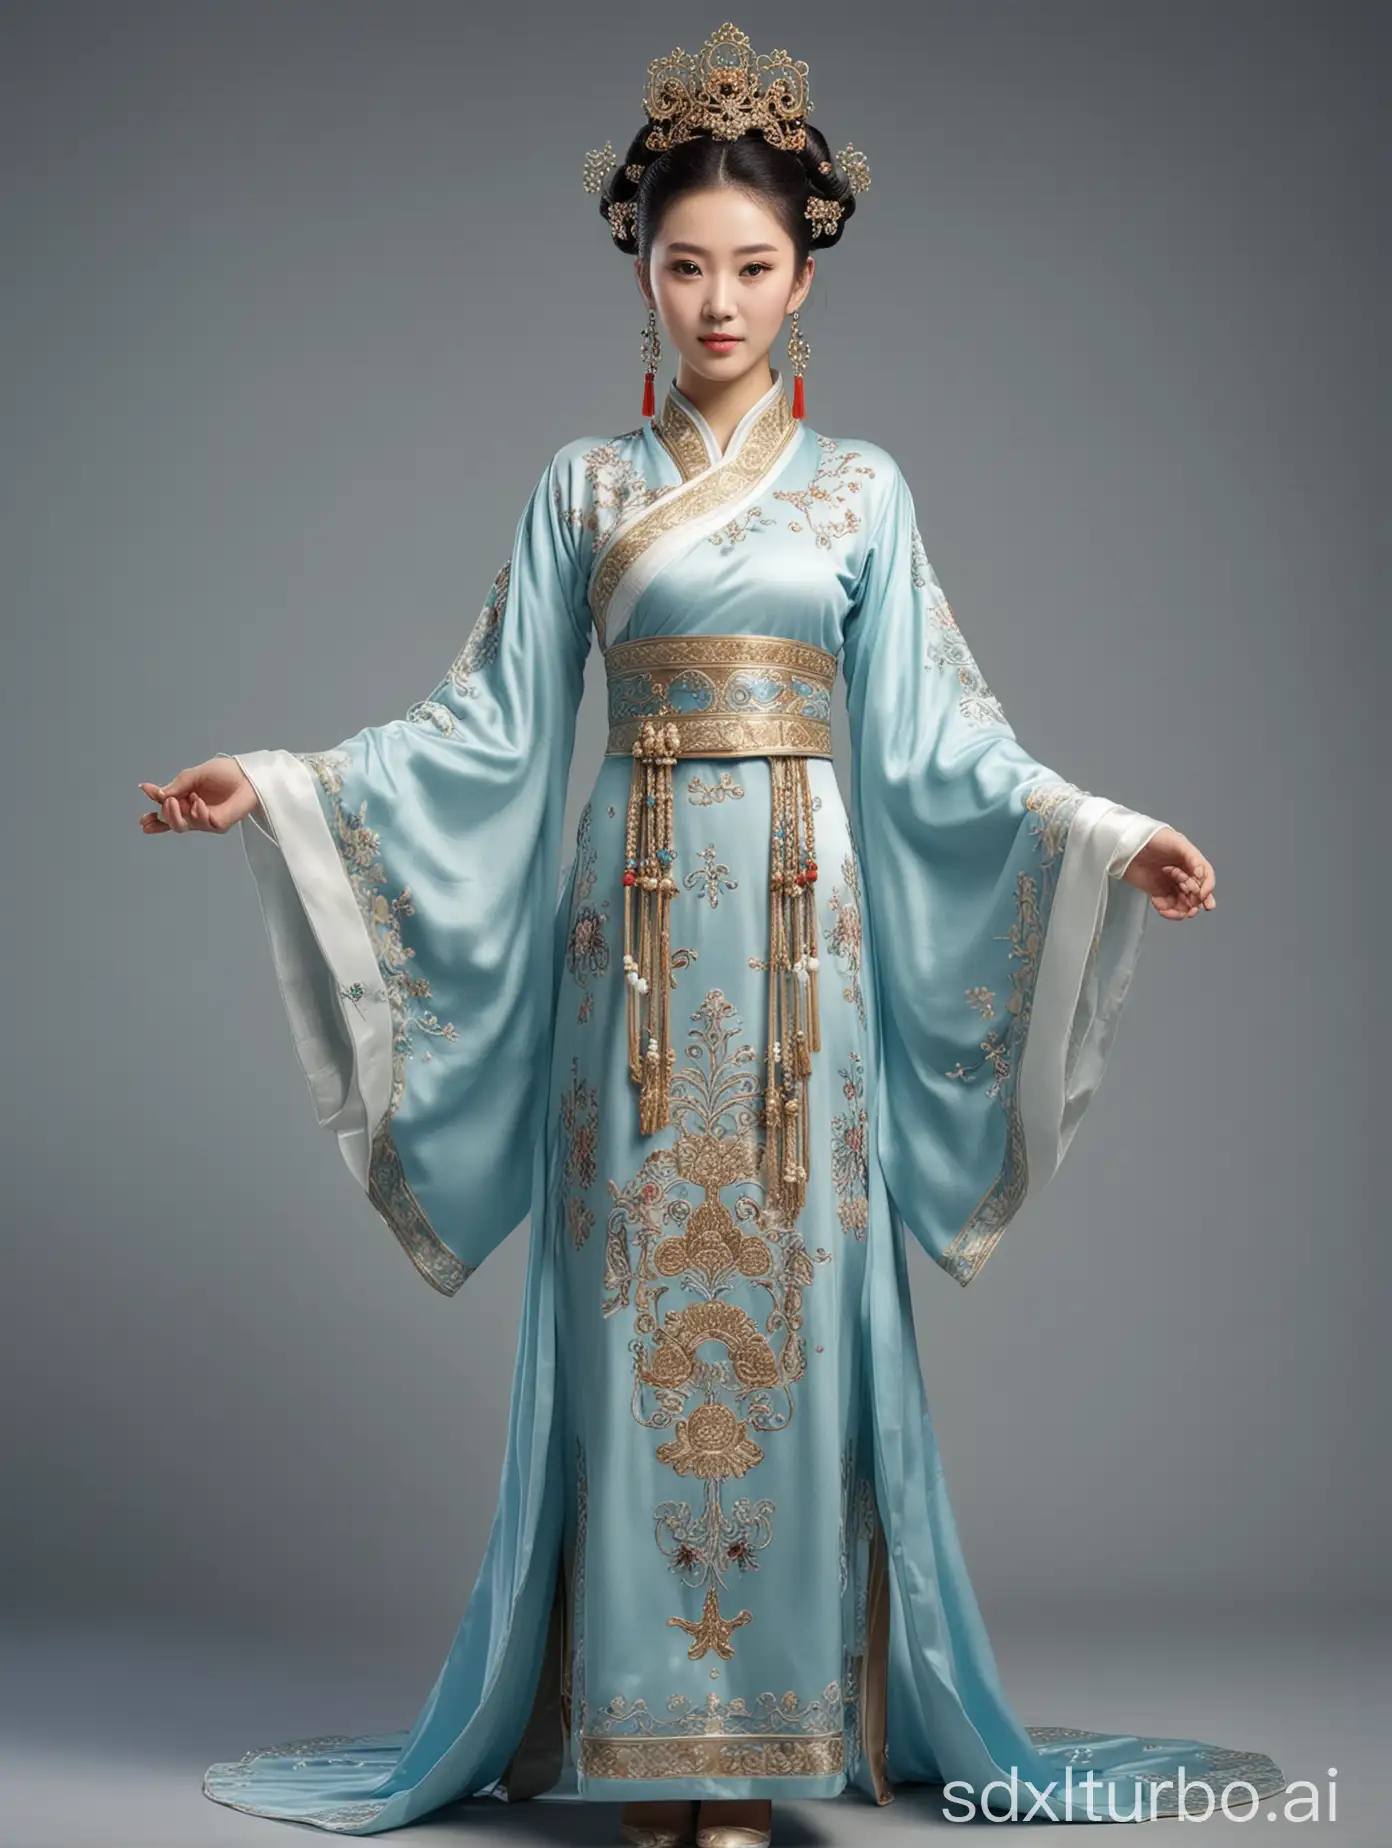 A beautiful Chinese woman in ancient costume, full body, front view, high definition